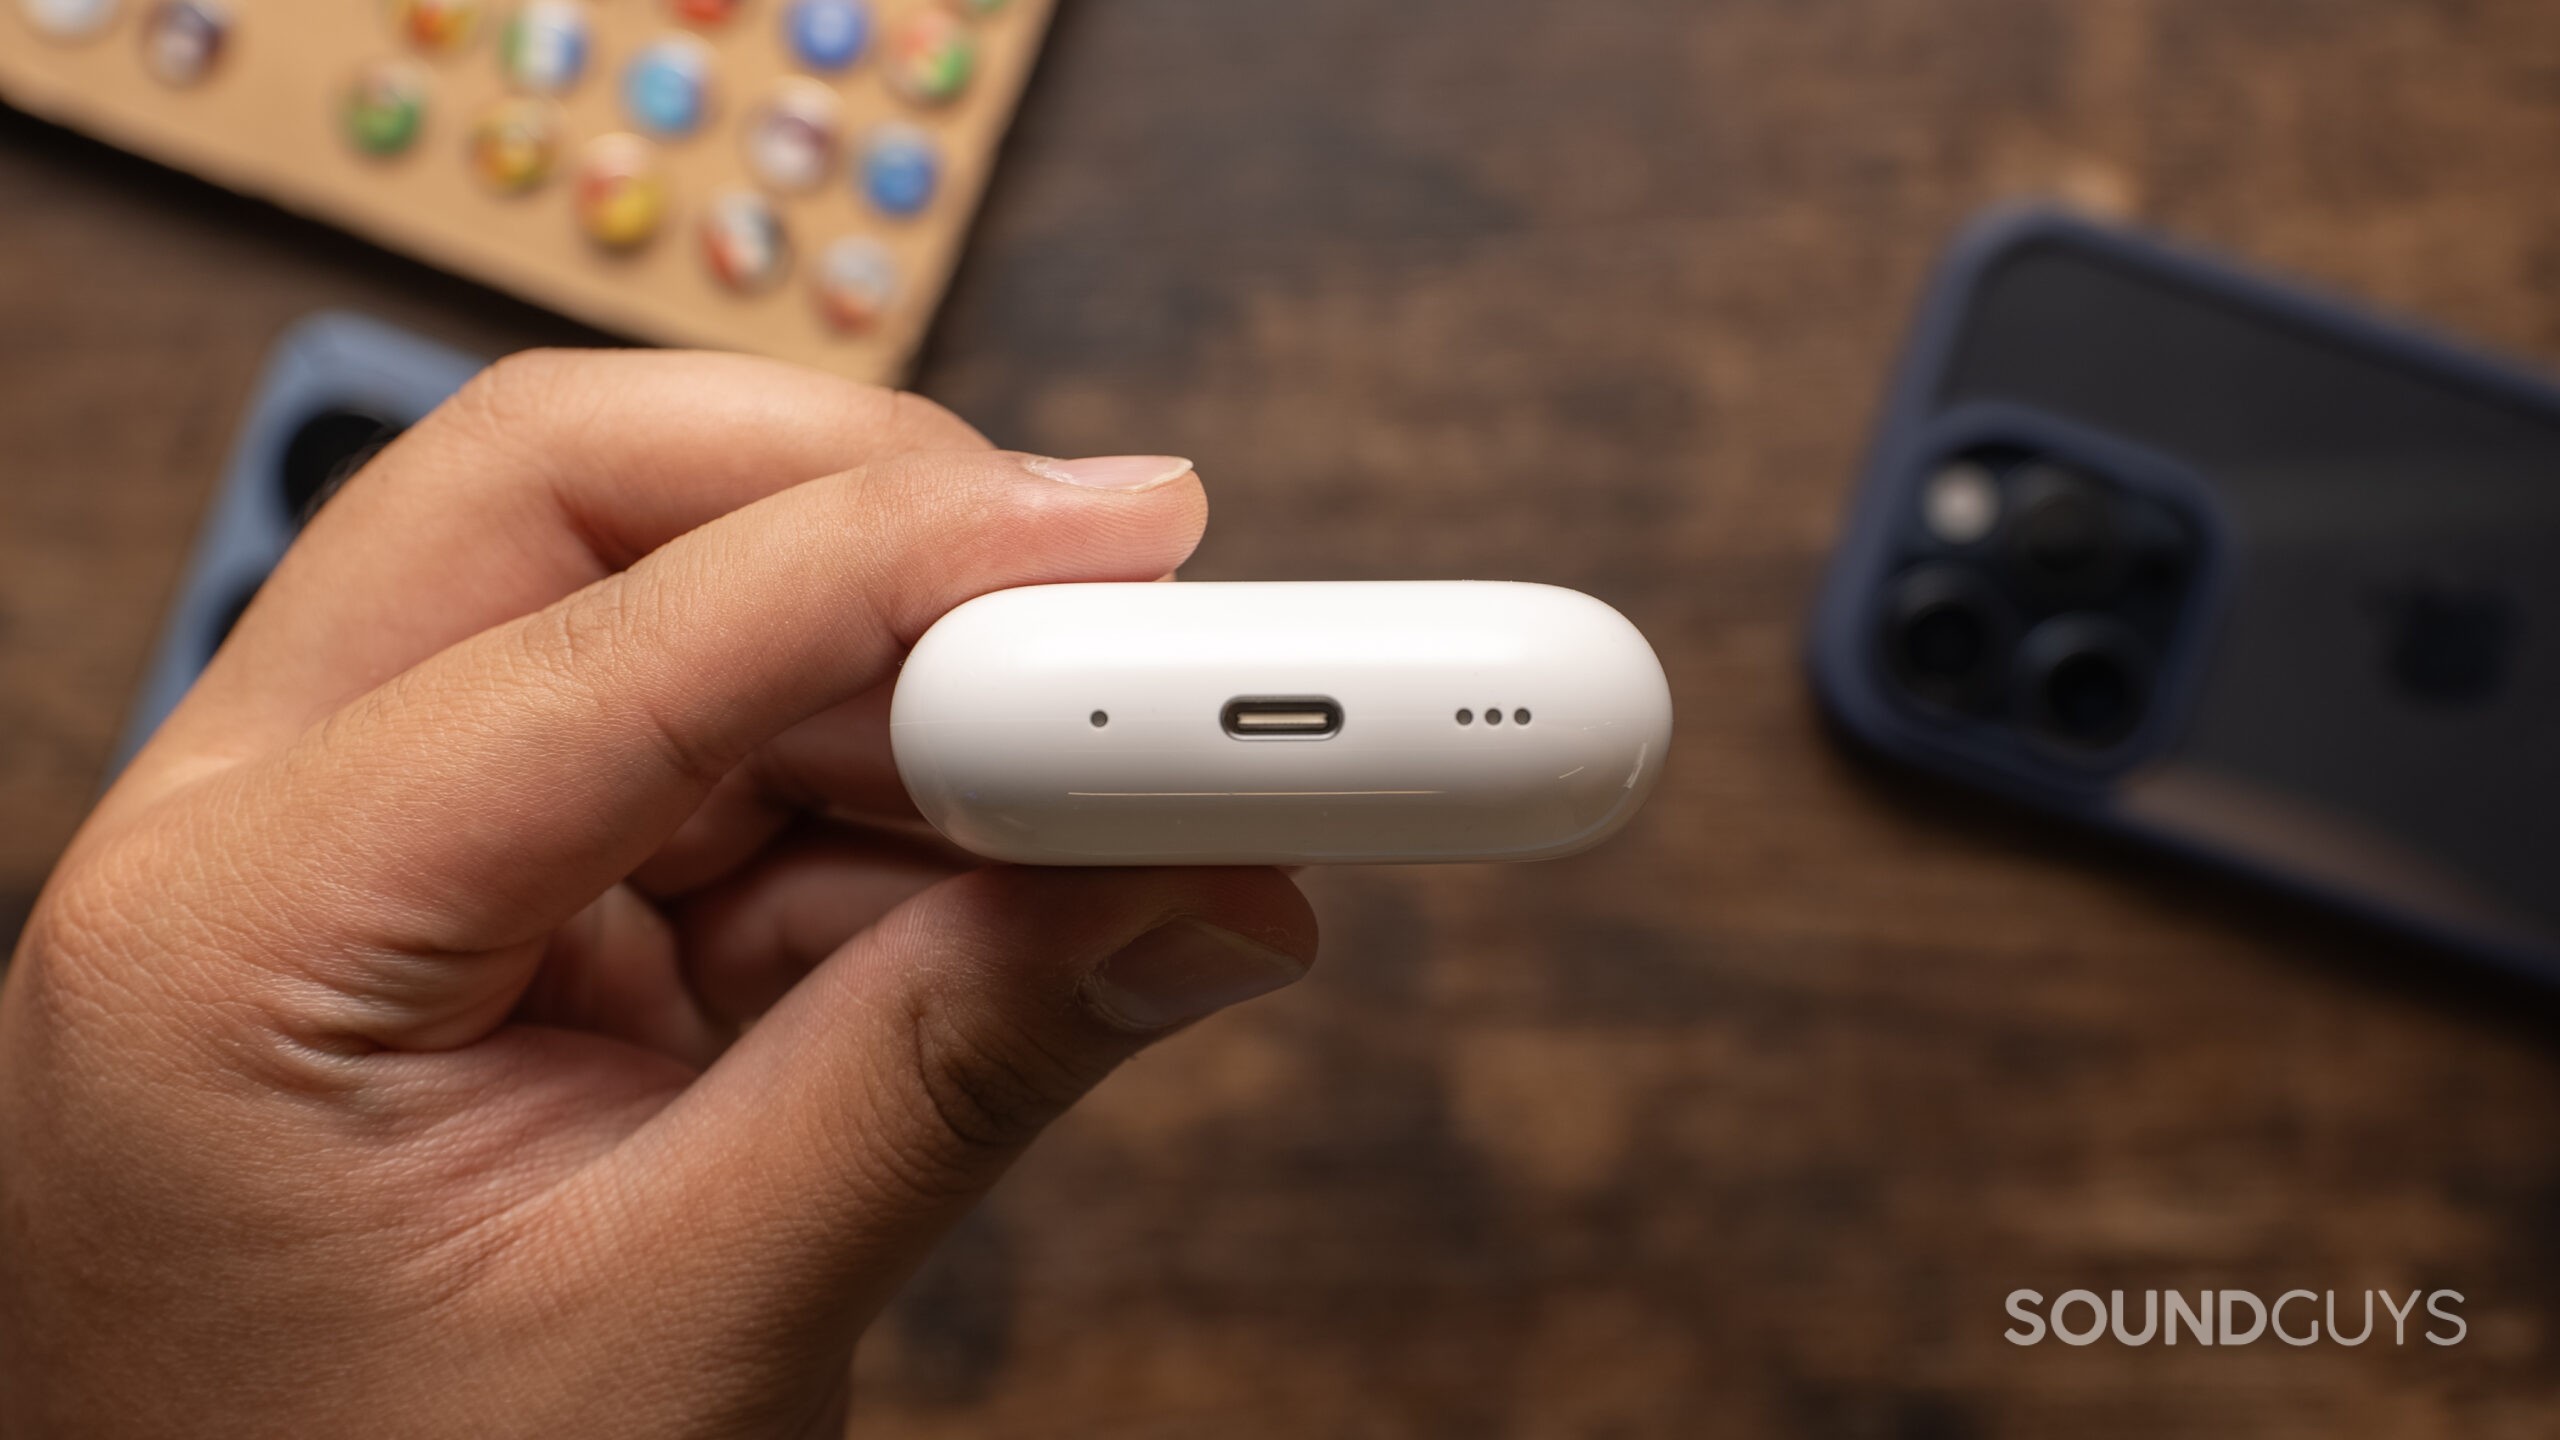 The Apple AirPods Pro (2nd Generation) have a USB-C port to charge the case.